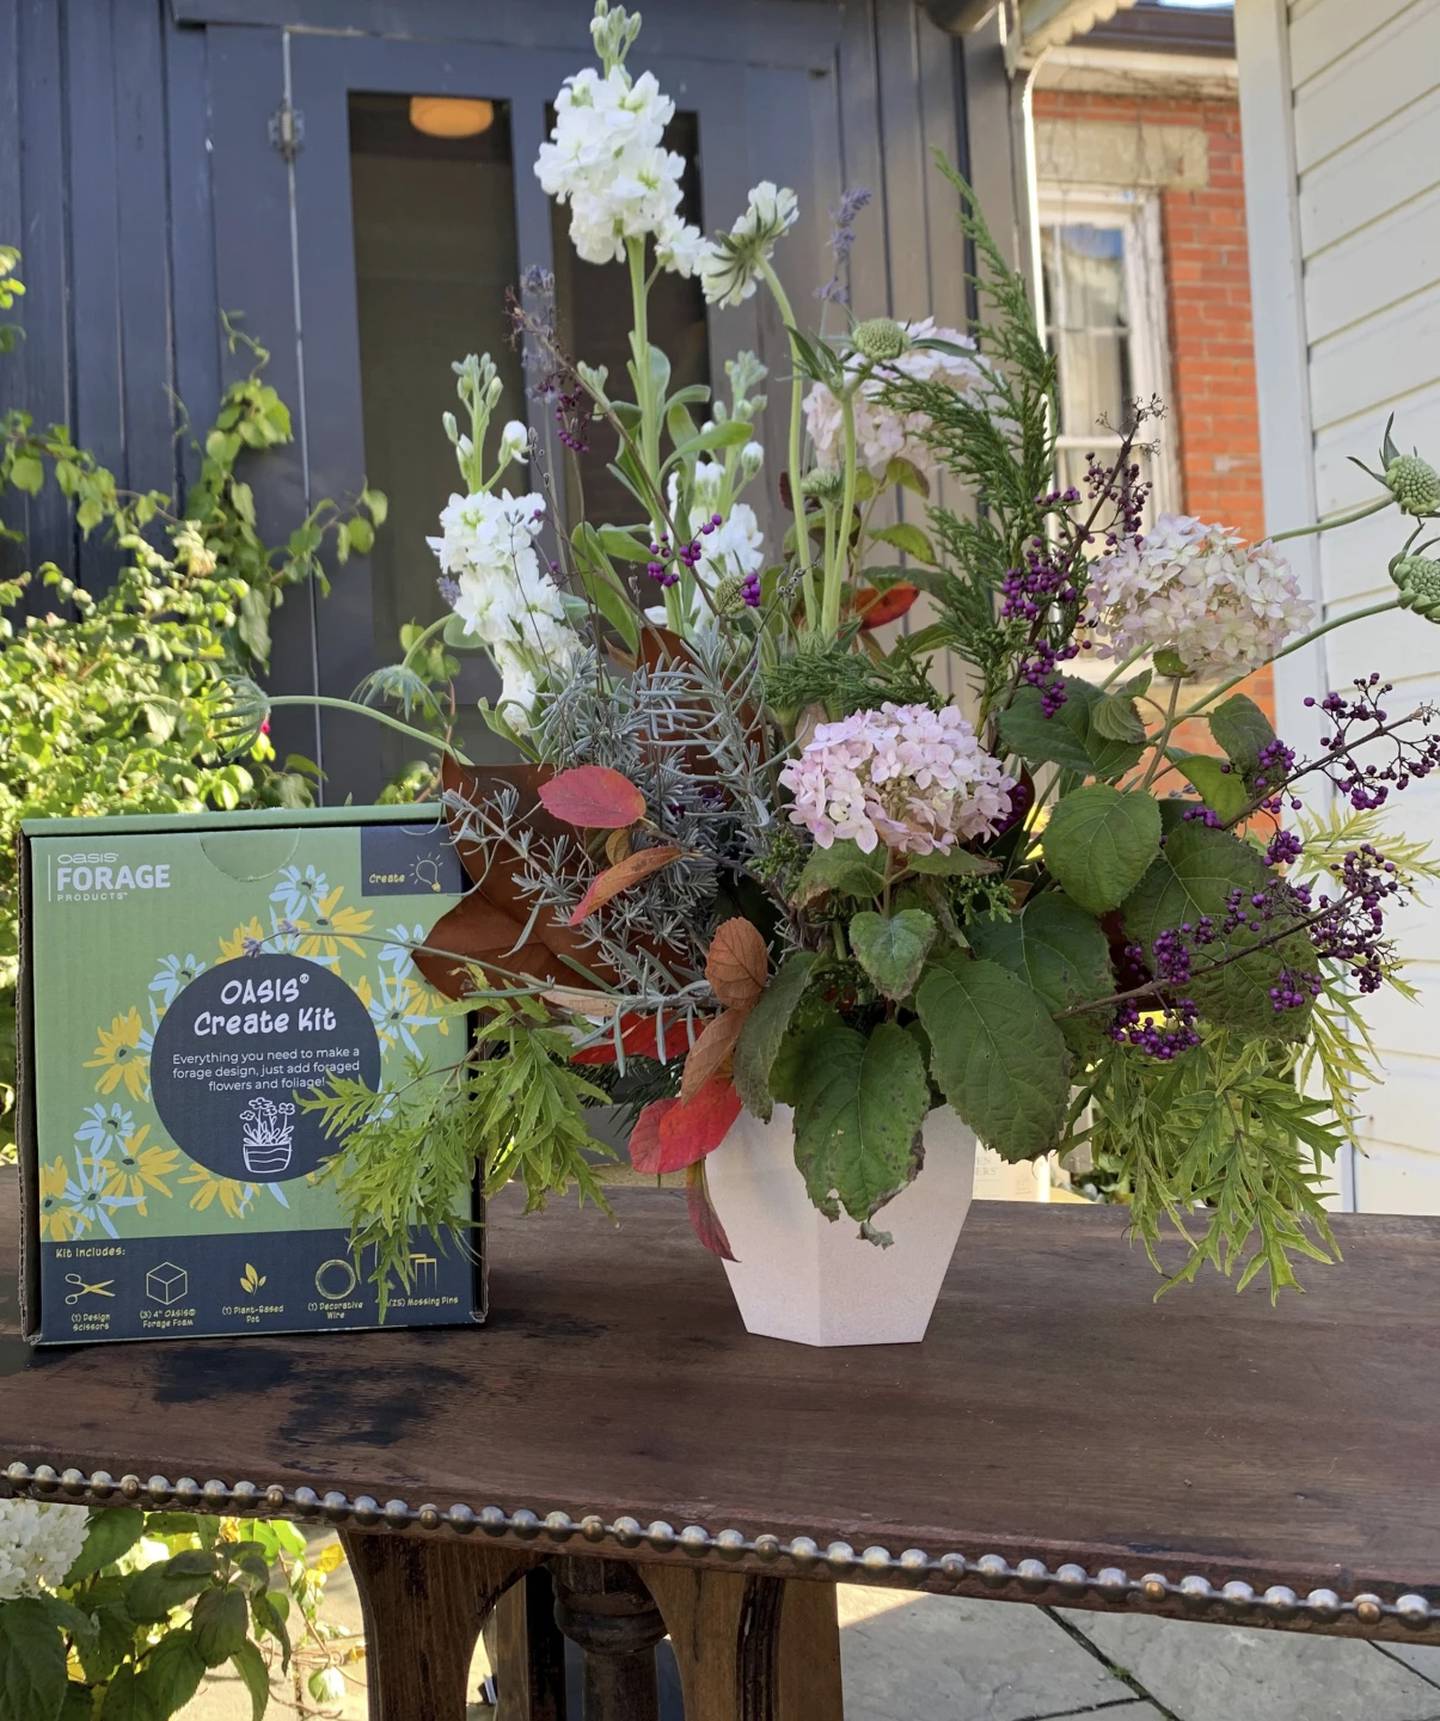 This image provided by OASIS Forage Products shows a floral arrangement, right, created using an OASIS Create Kit.